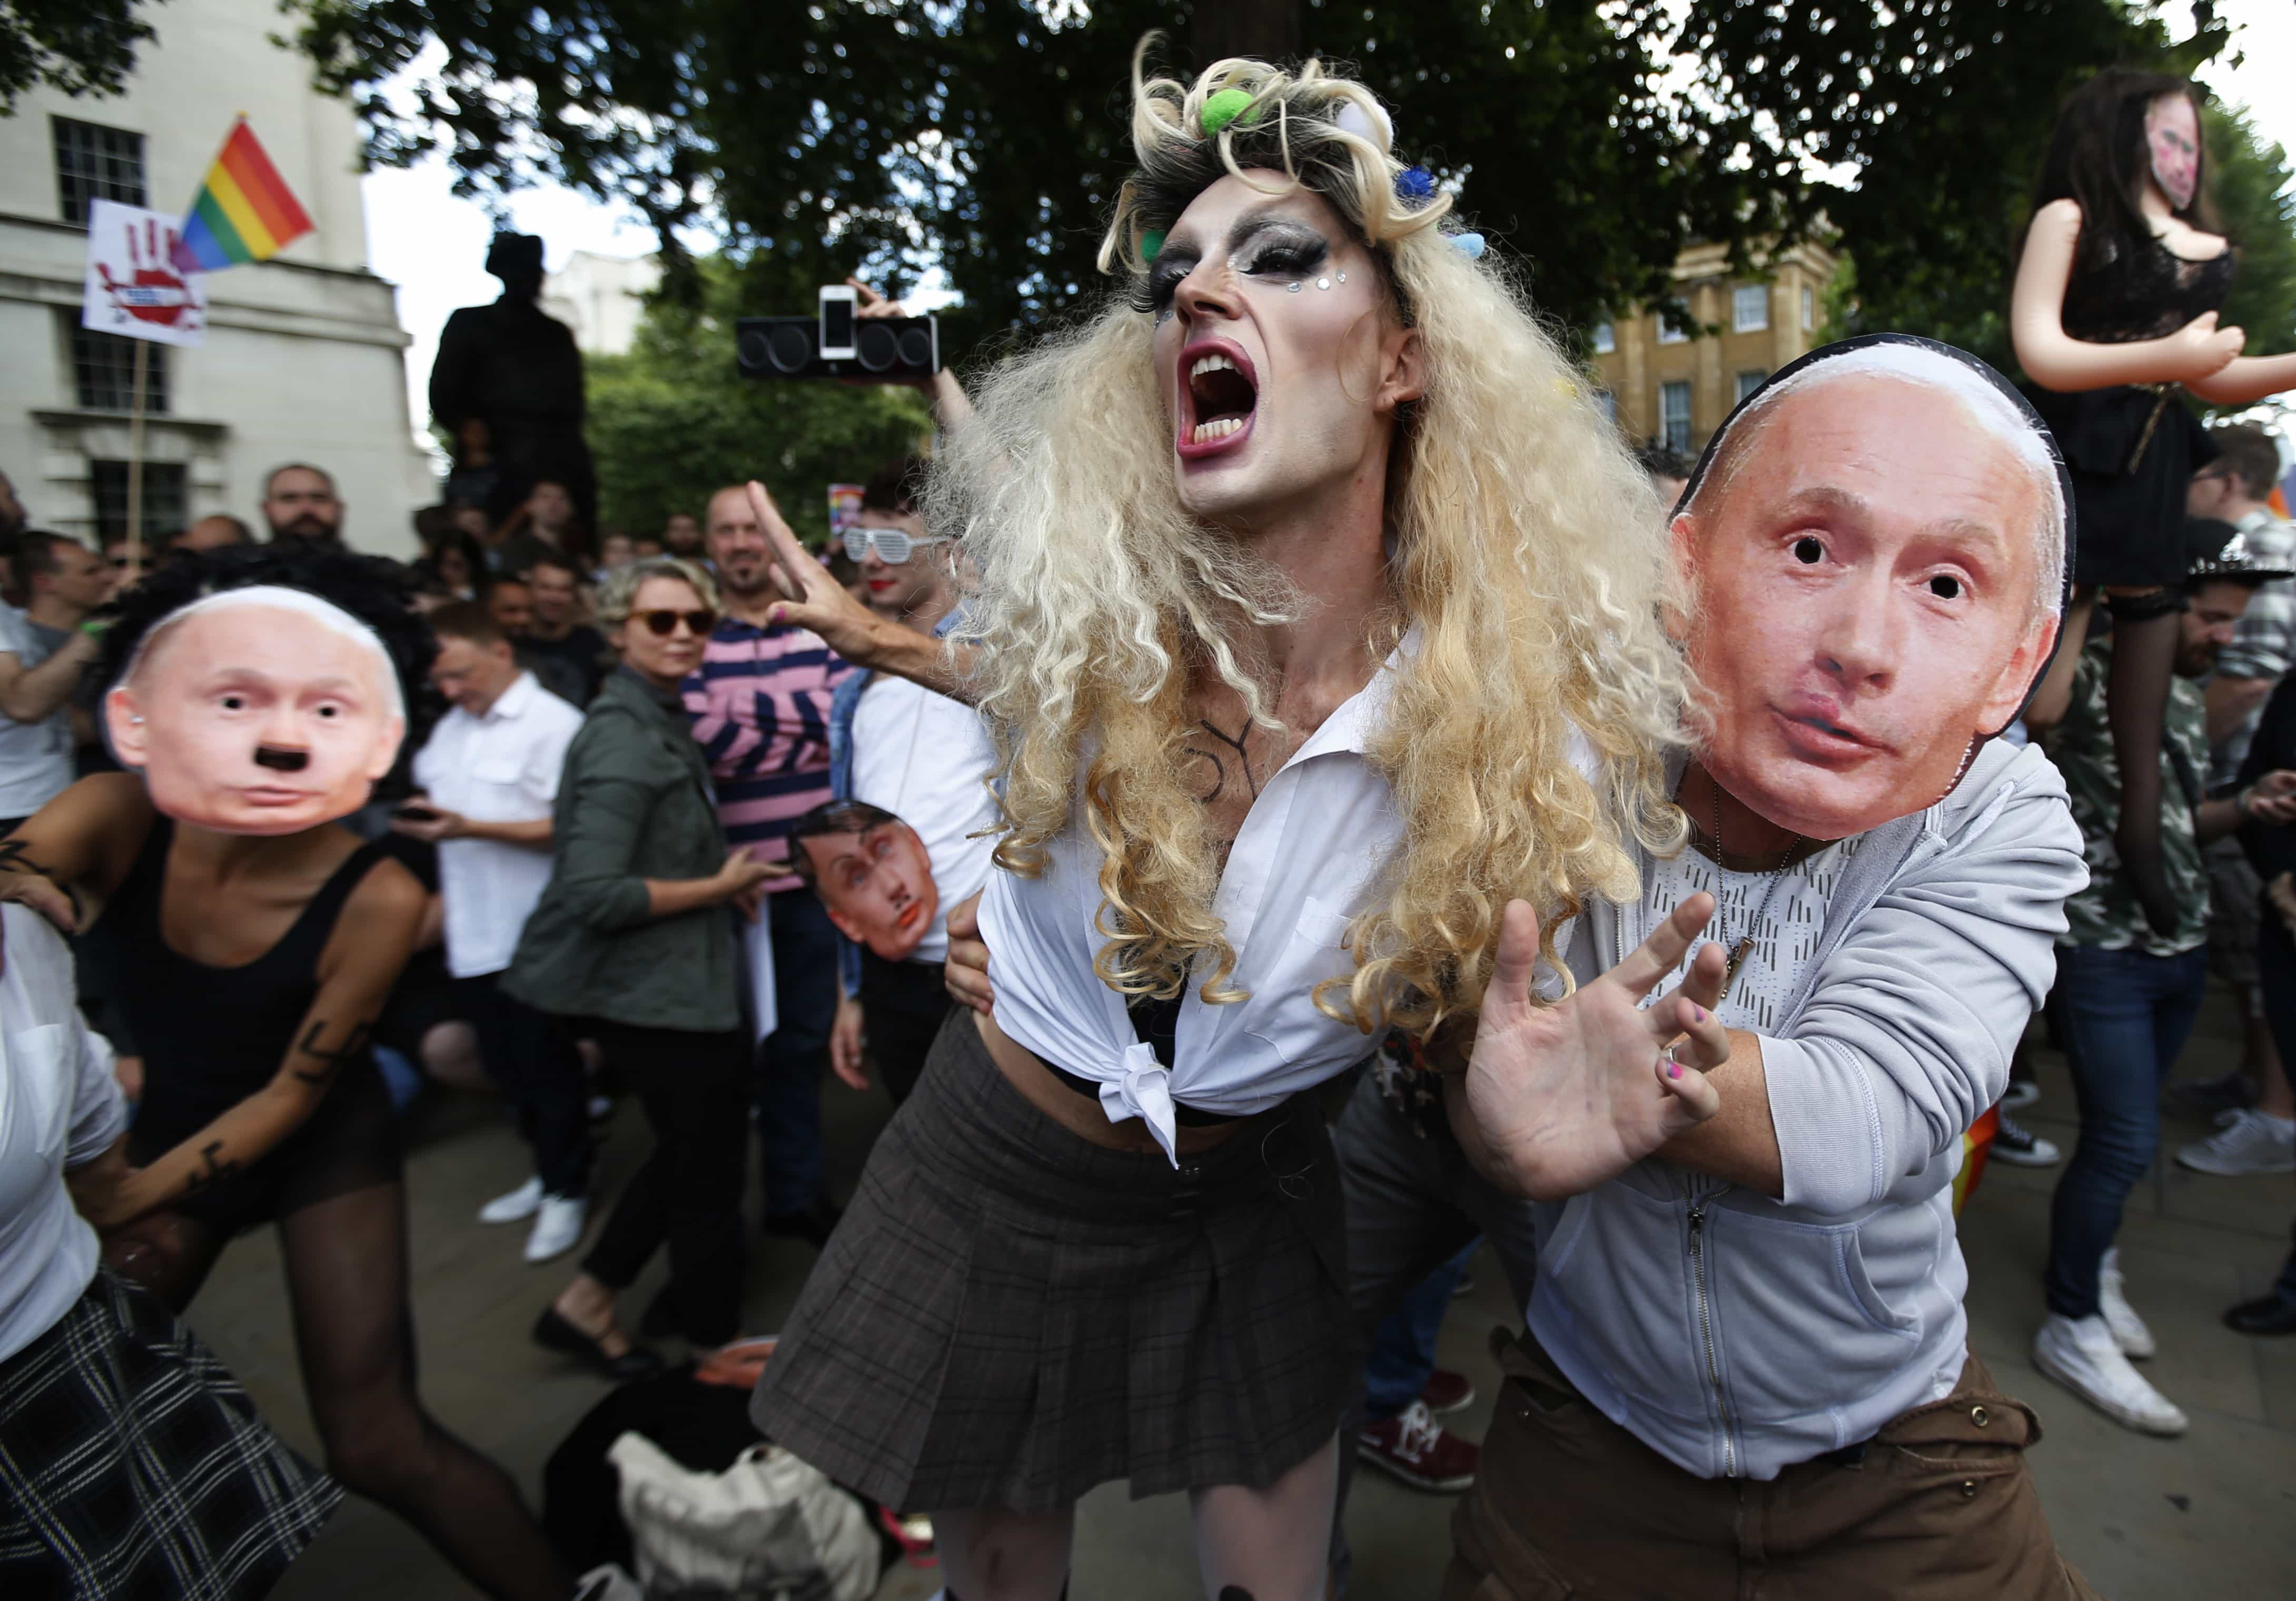 Activists stage a theatrical play where gay people are restrained by others wearing masks depicting Russian President Vladimir Putin, during a protest in London, 10 August 2013, AP Photo/Lefteris Pitarakis